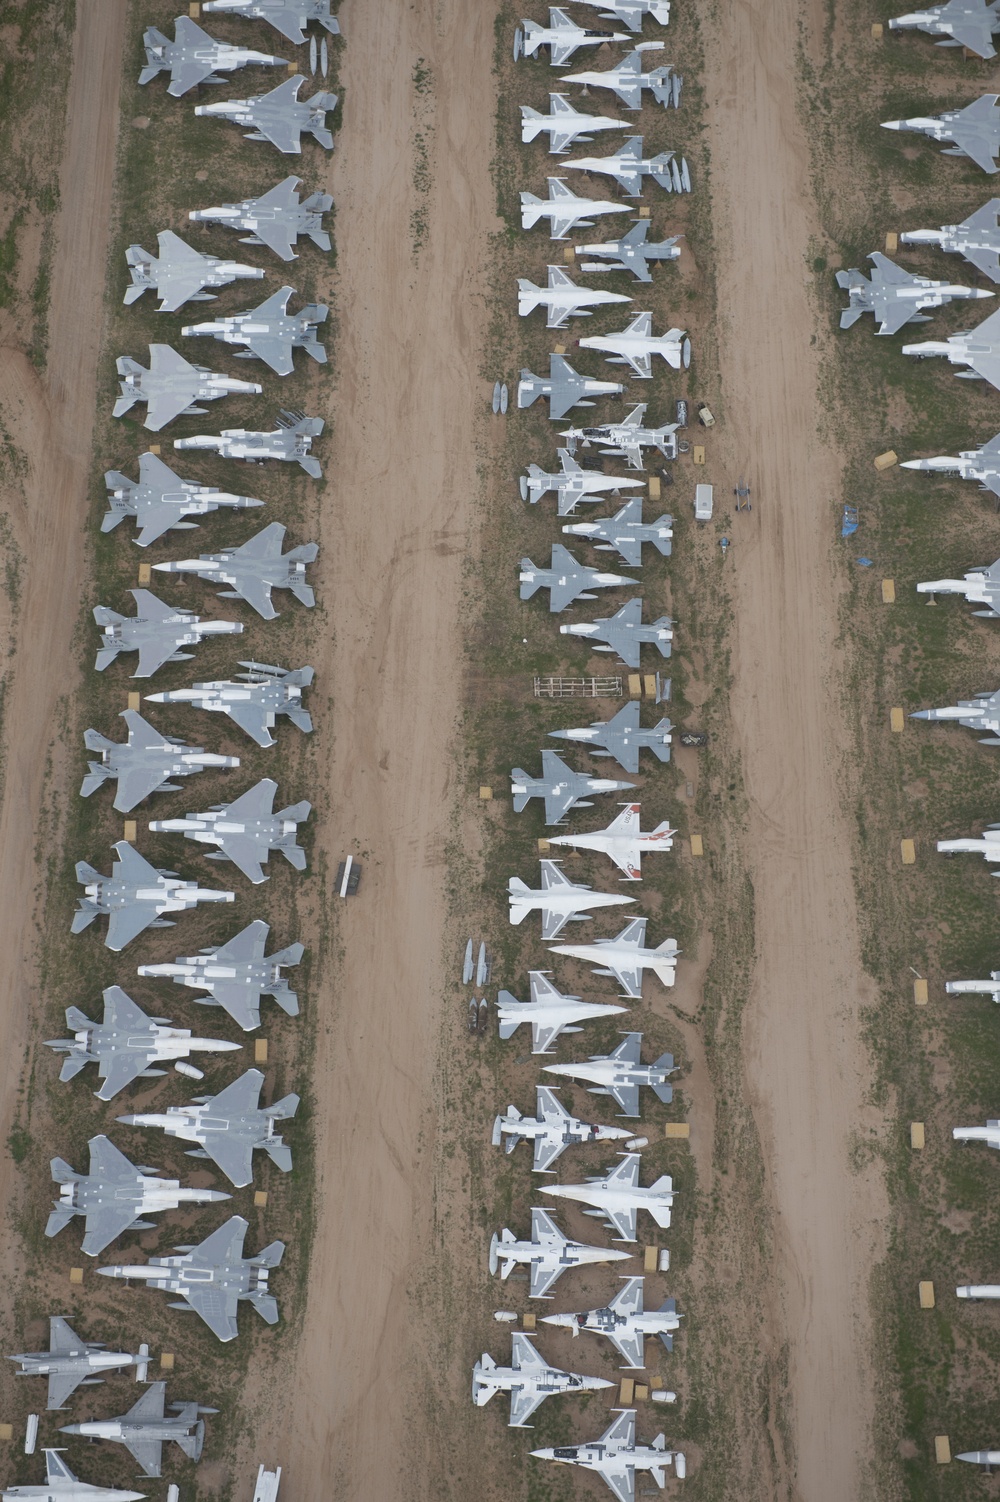 309th AMARG Aircraft and Missile Storage and Maintenance Facility